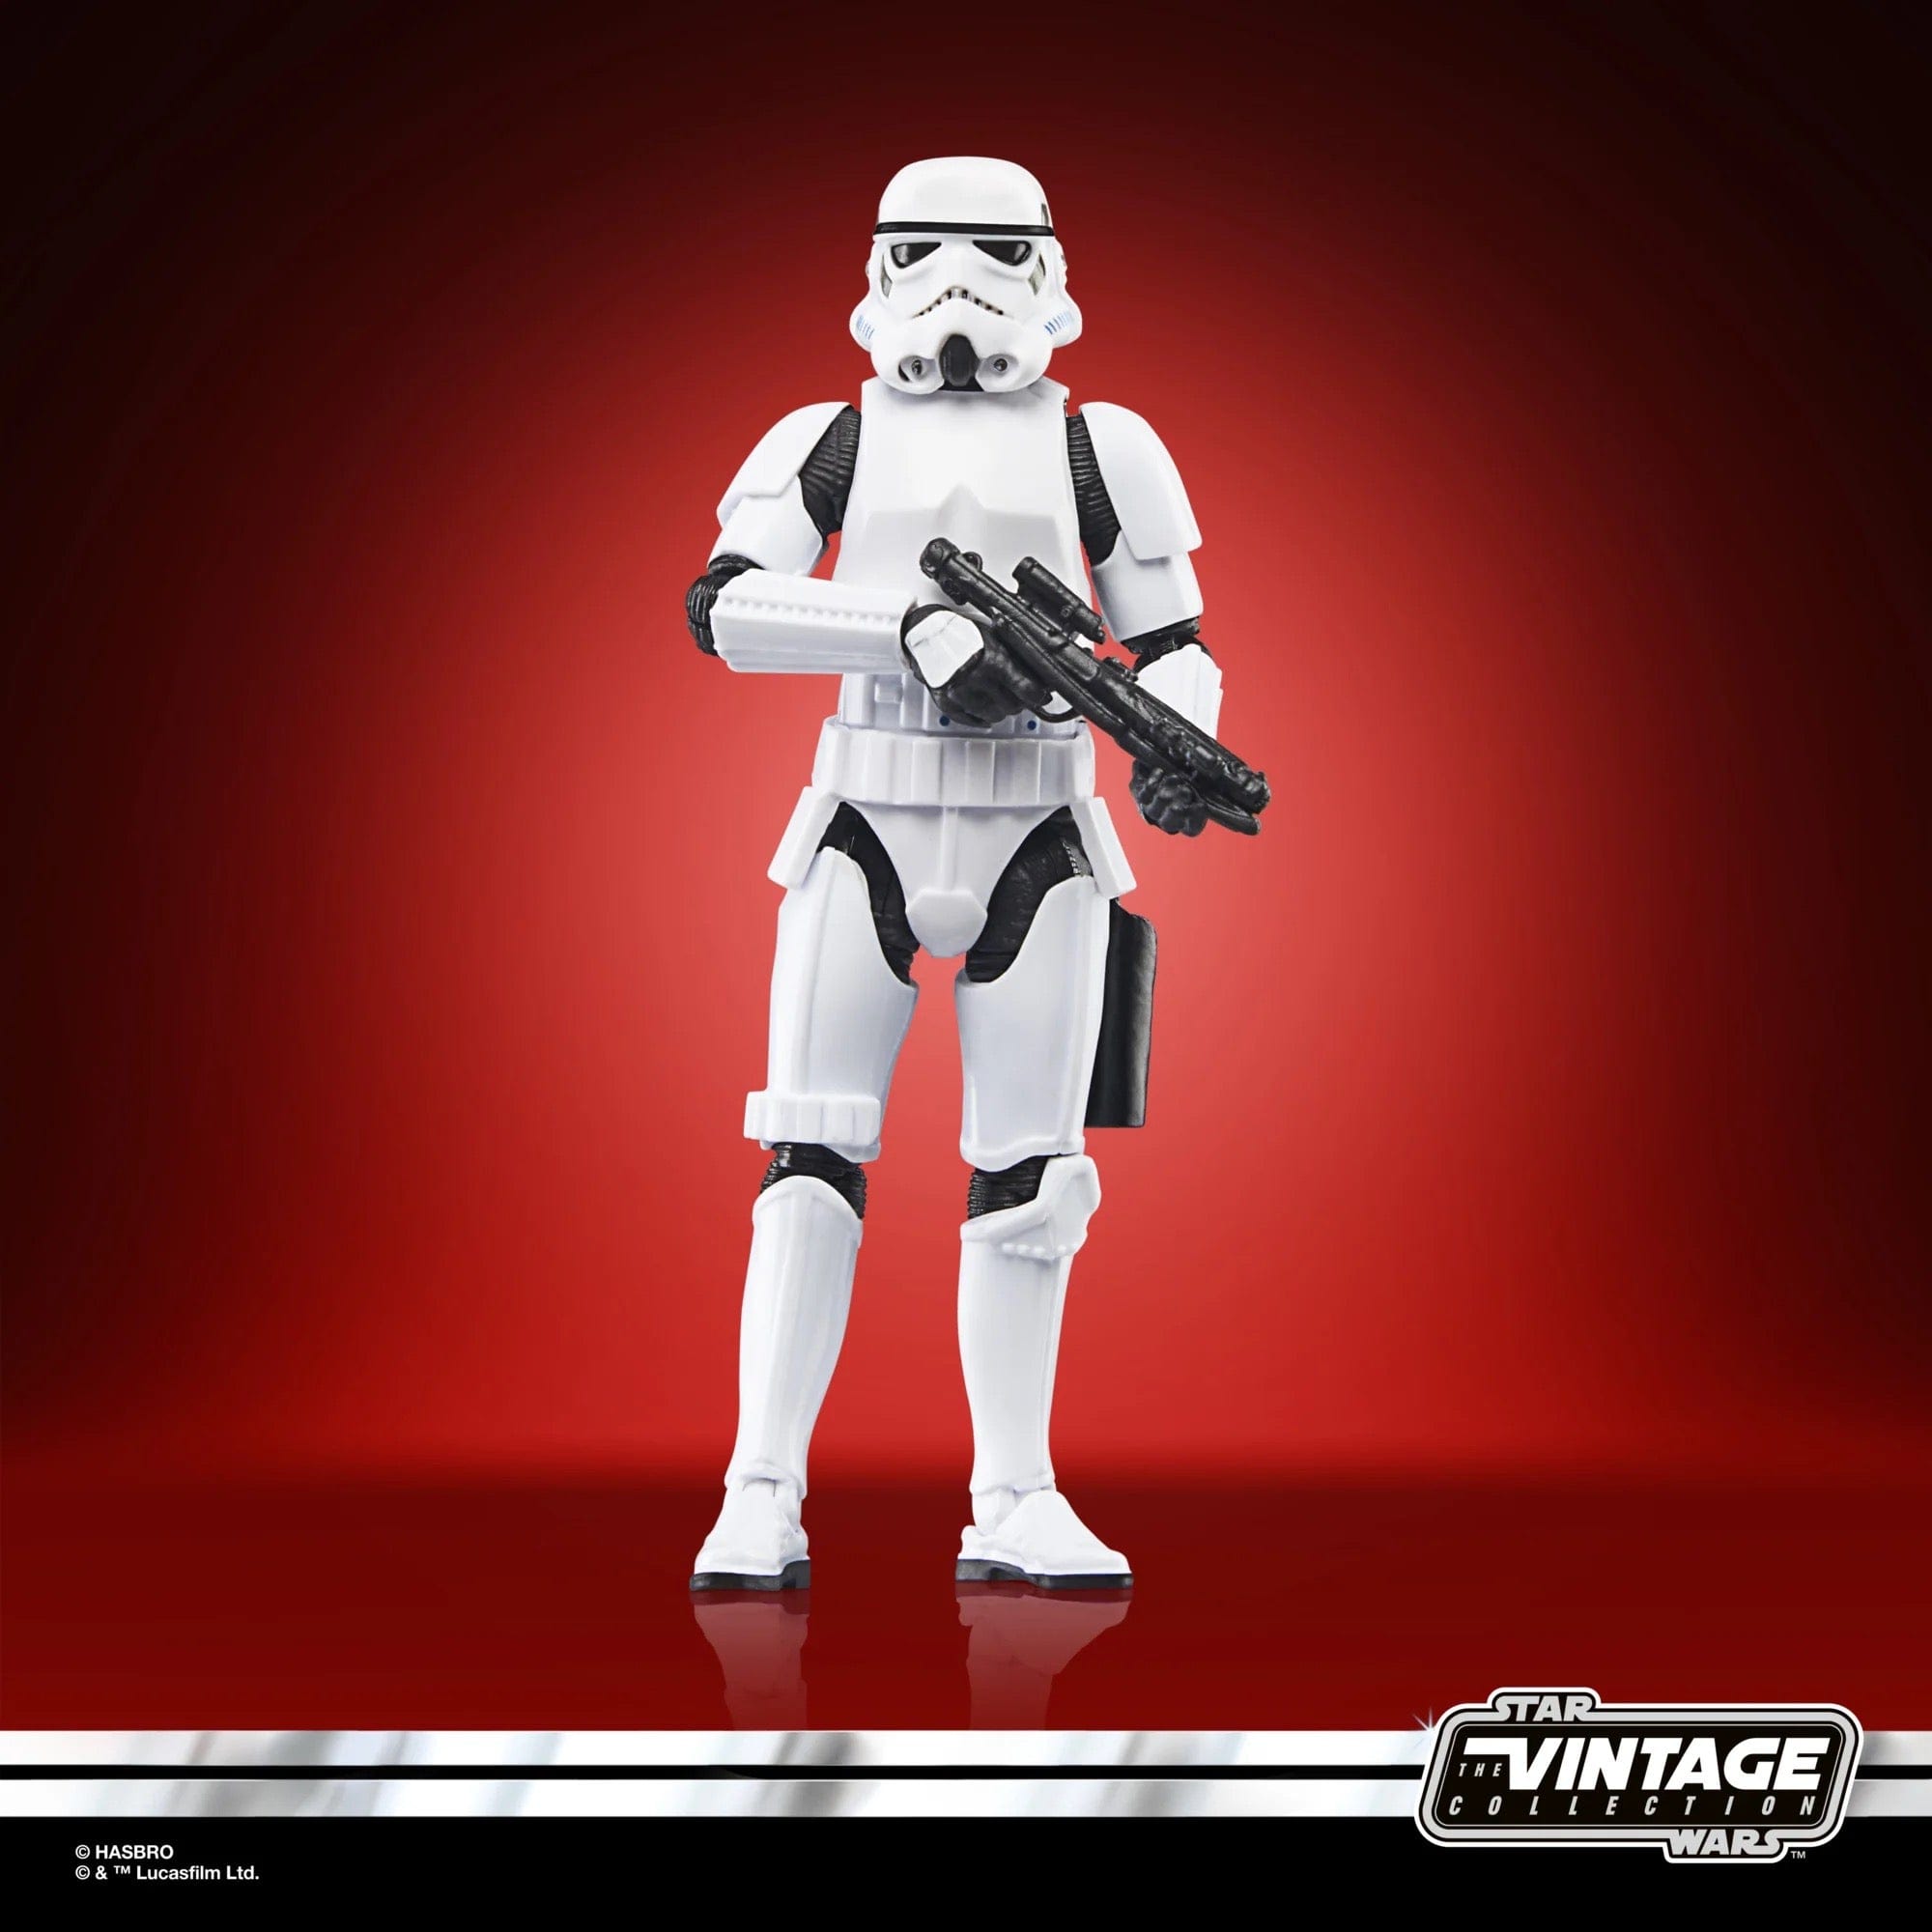 Hasbro Star Wars The Vintage Collection A New Hope Stormtrooper Action Figure